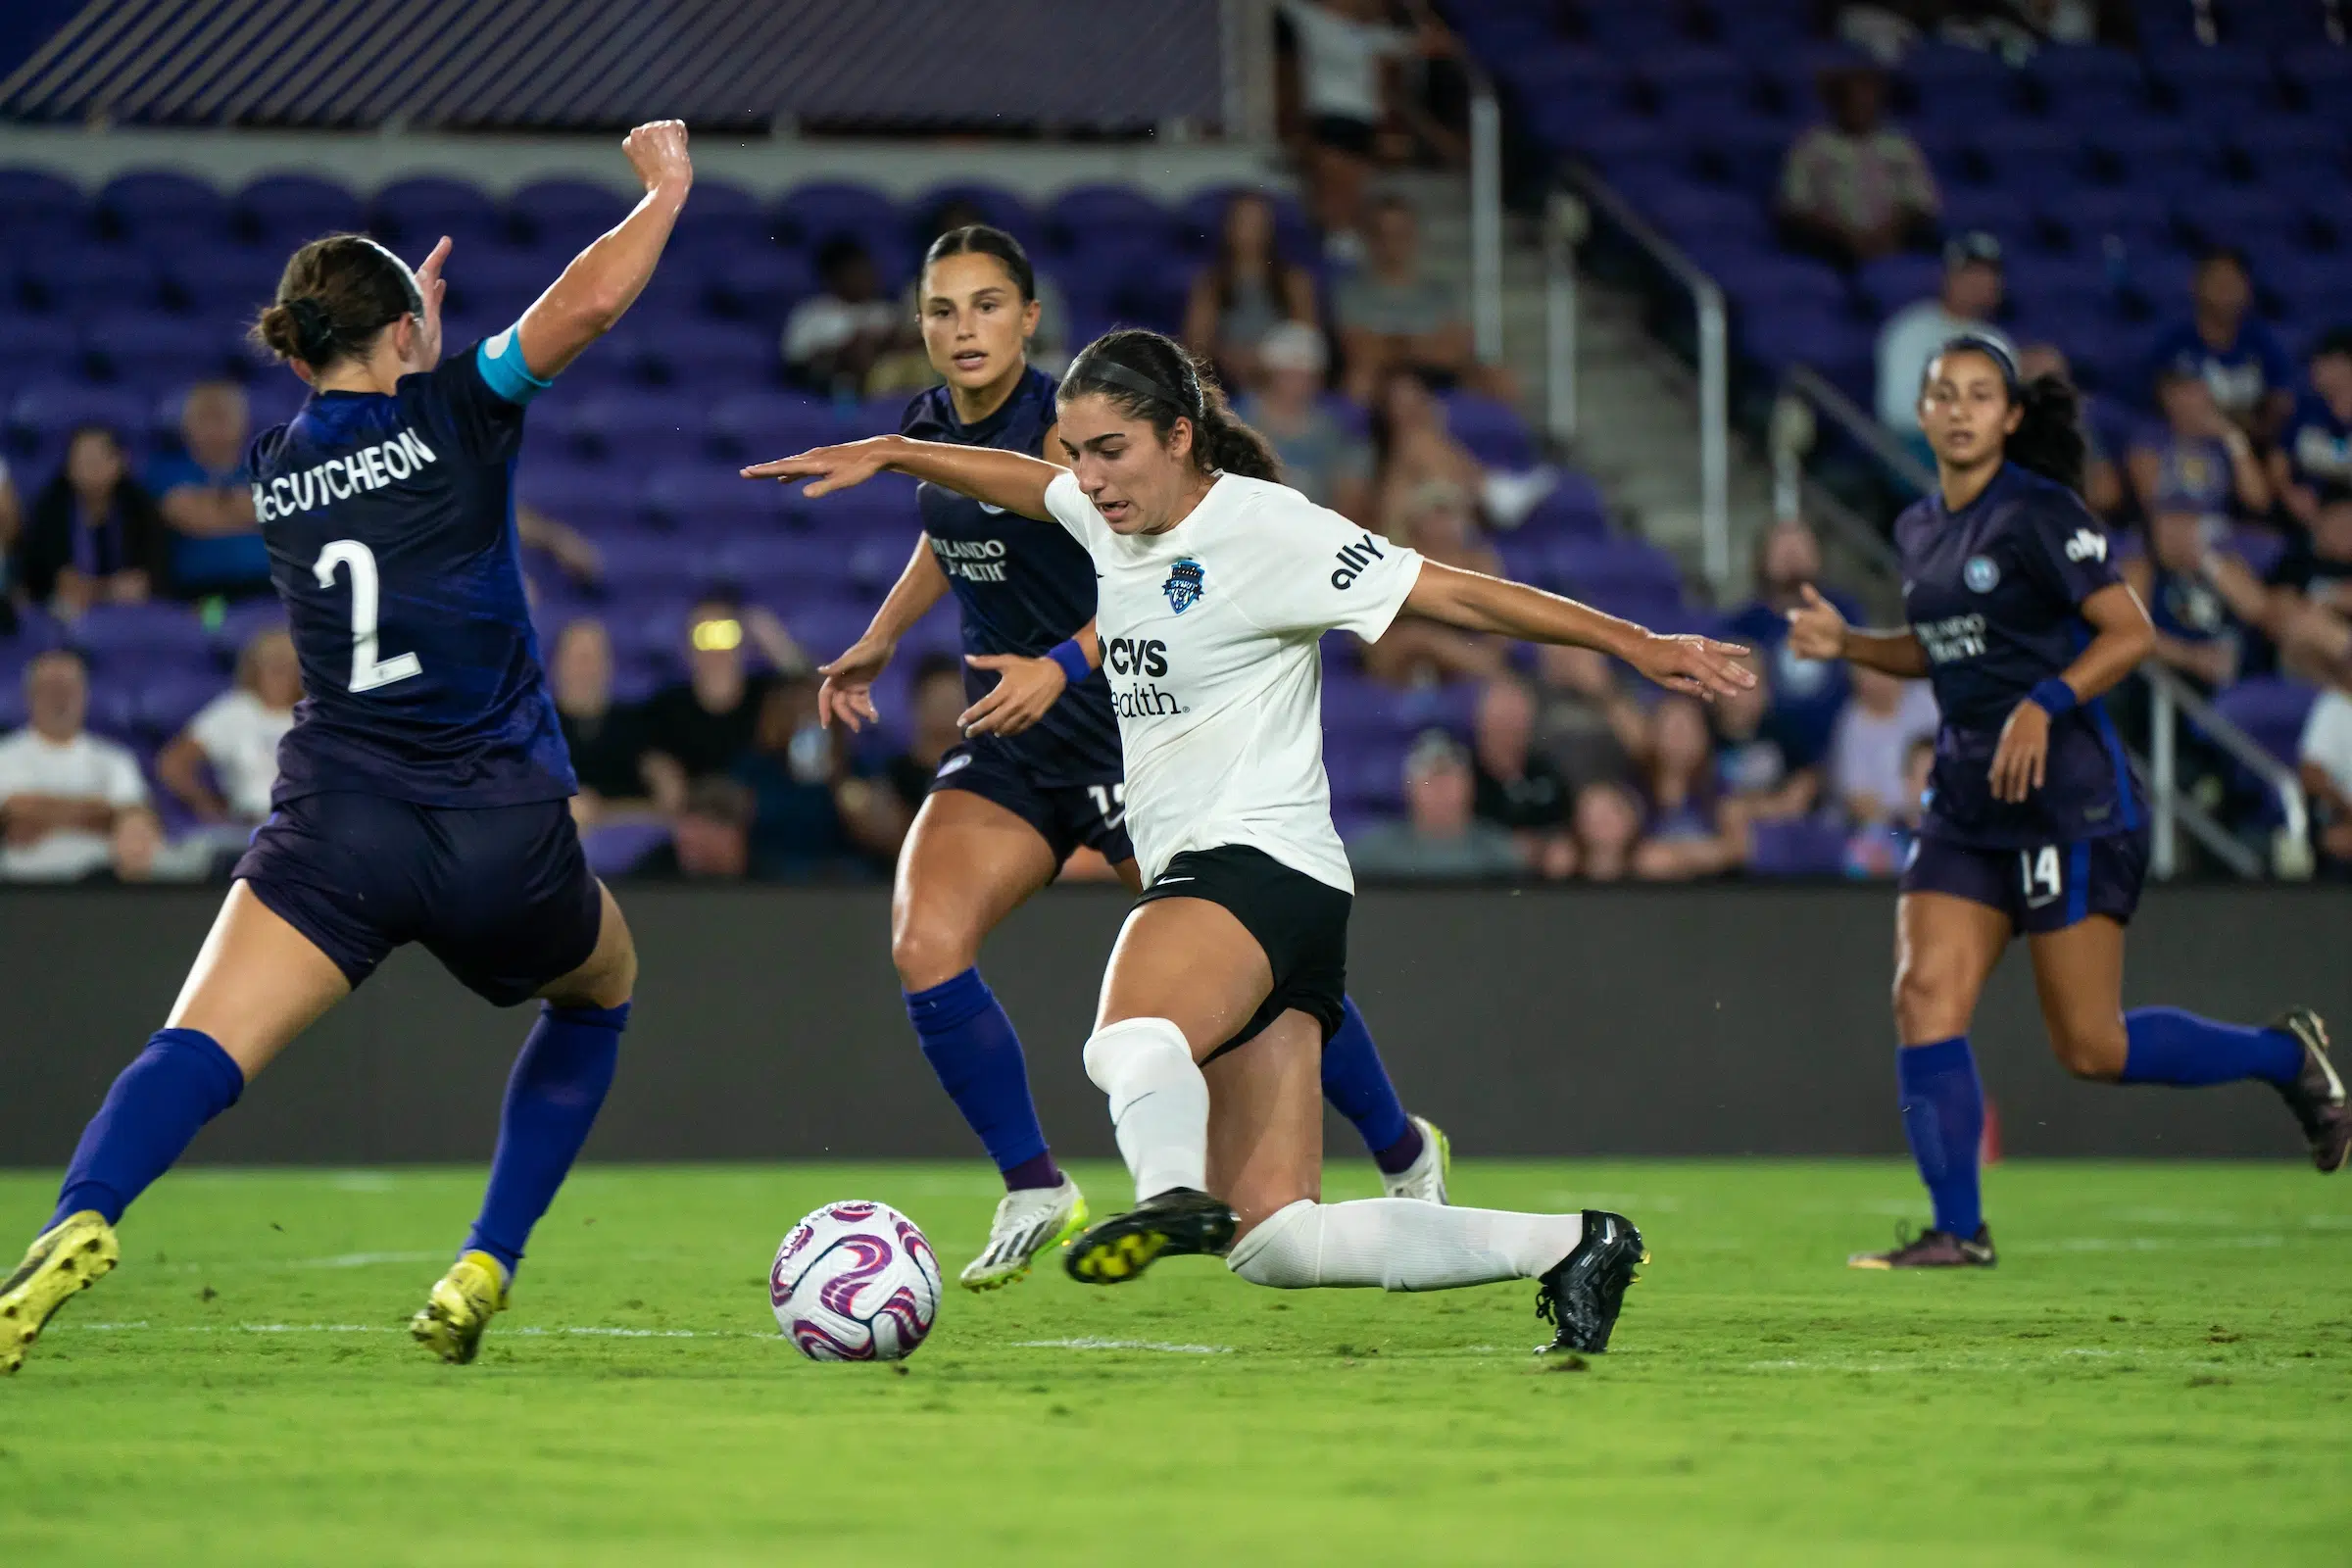 Lena Silano in a white top and black shorts attempts to dribble a soccer ball through two defenders wearing dark purple uniforms.